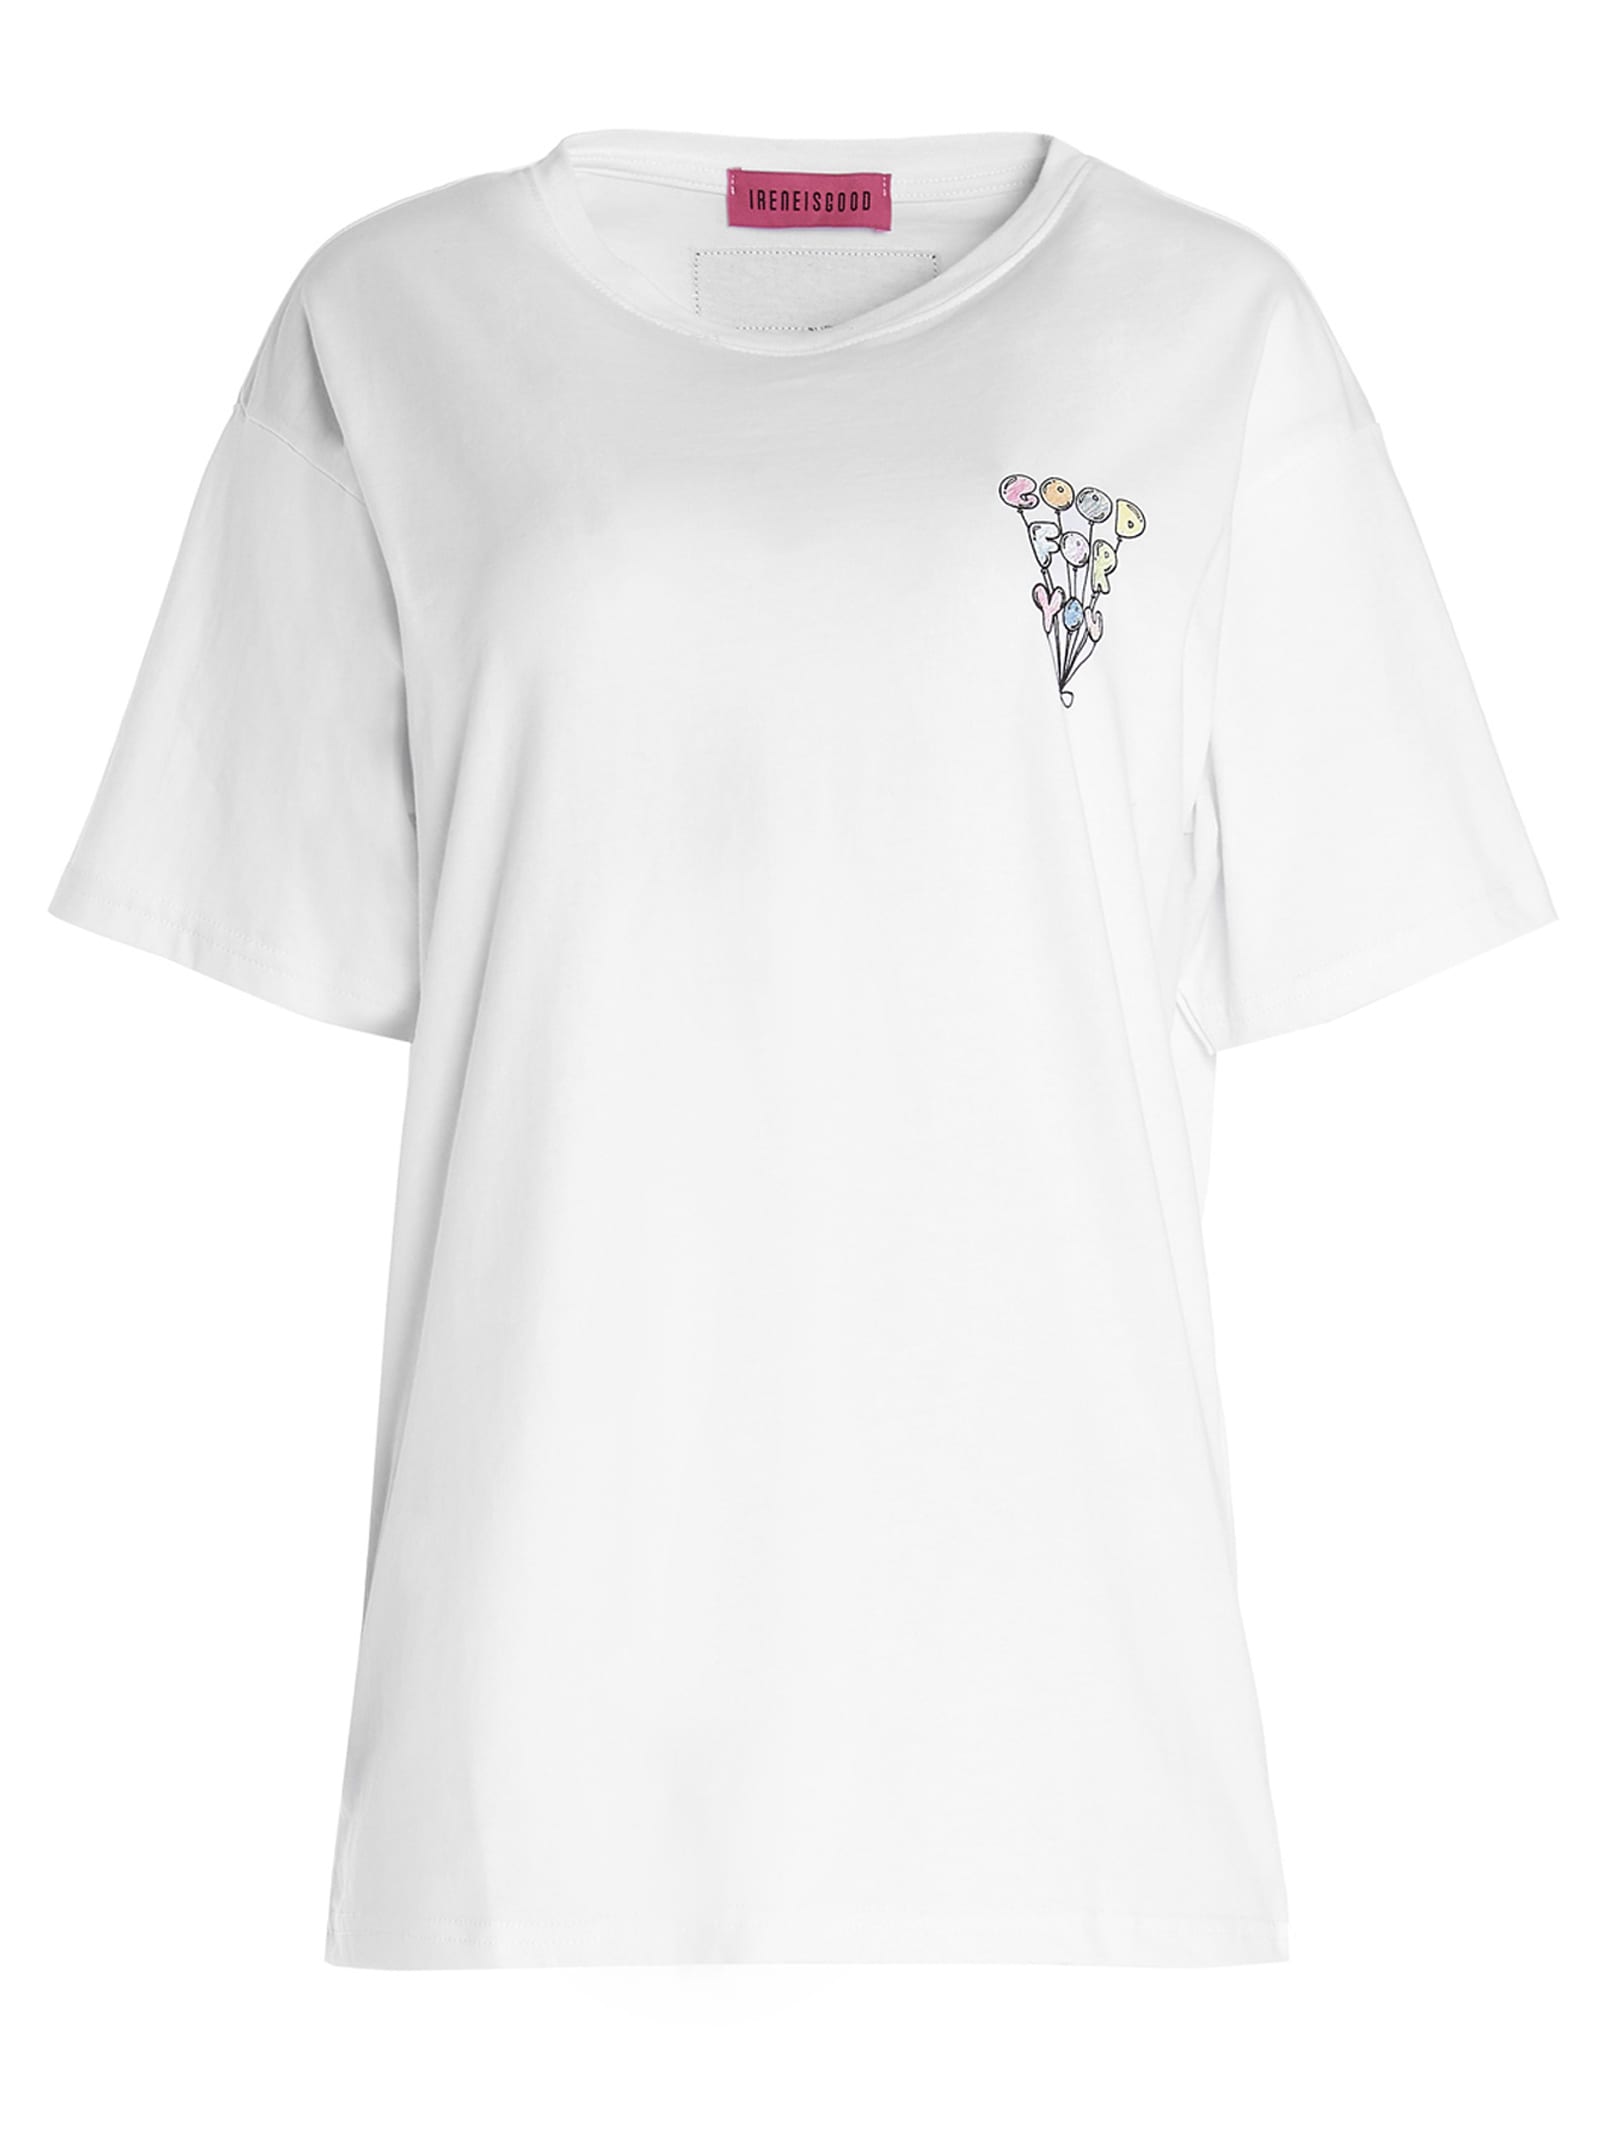 IRENEISGOOD GOOD VIBES T-SHIRT,21SSIGTS006 WHITE